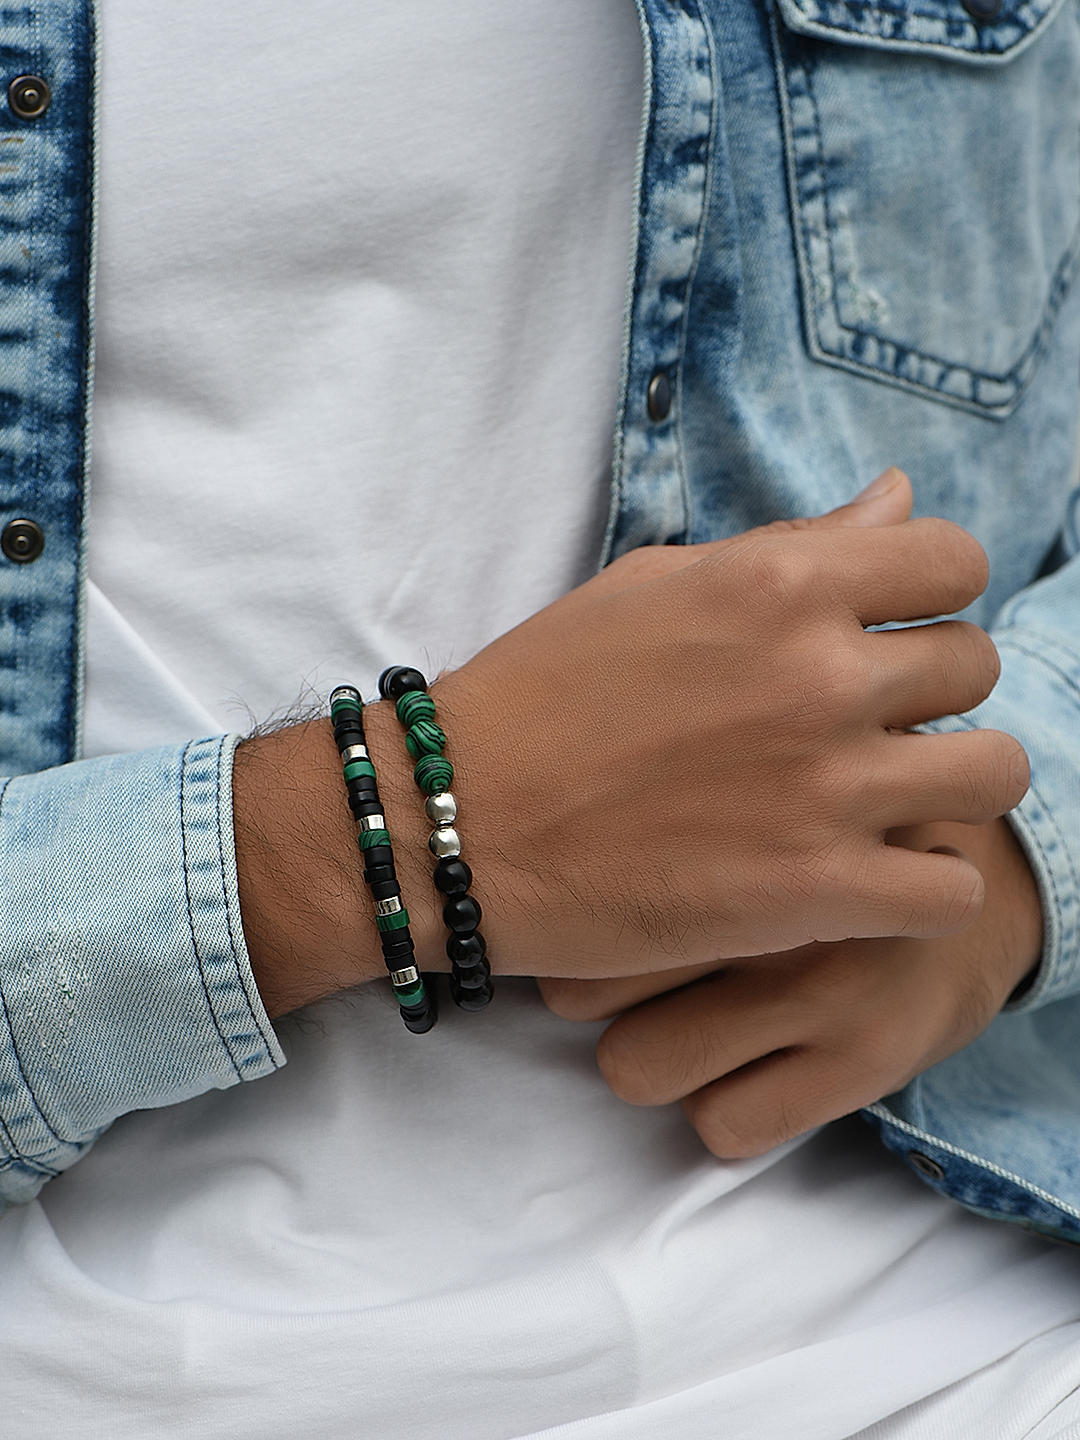 Steel by Design Men's Stainless Steel Green Leather Bracelet - QVC.com